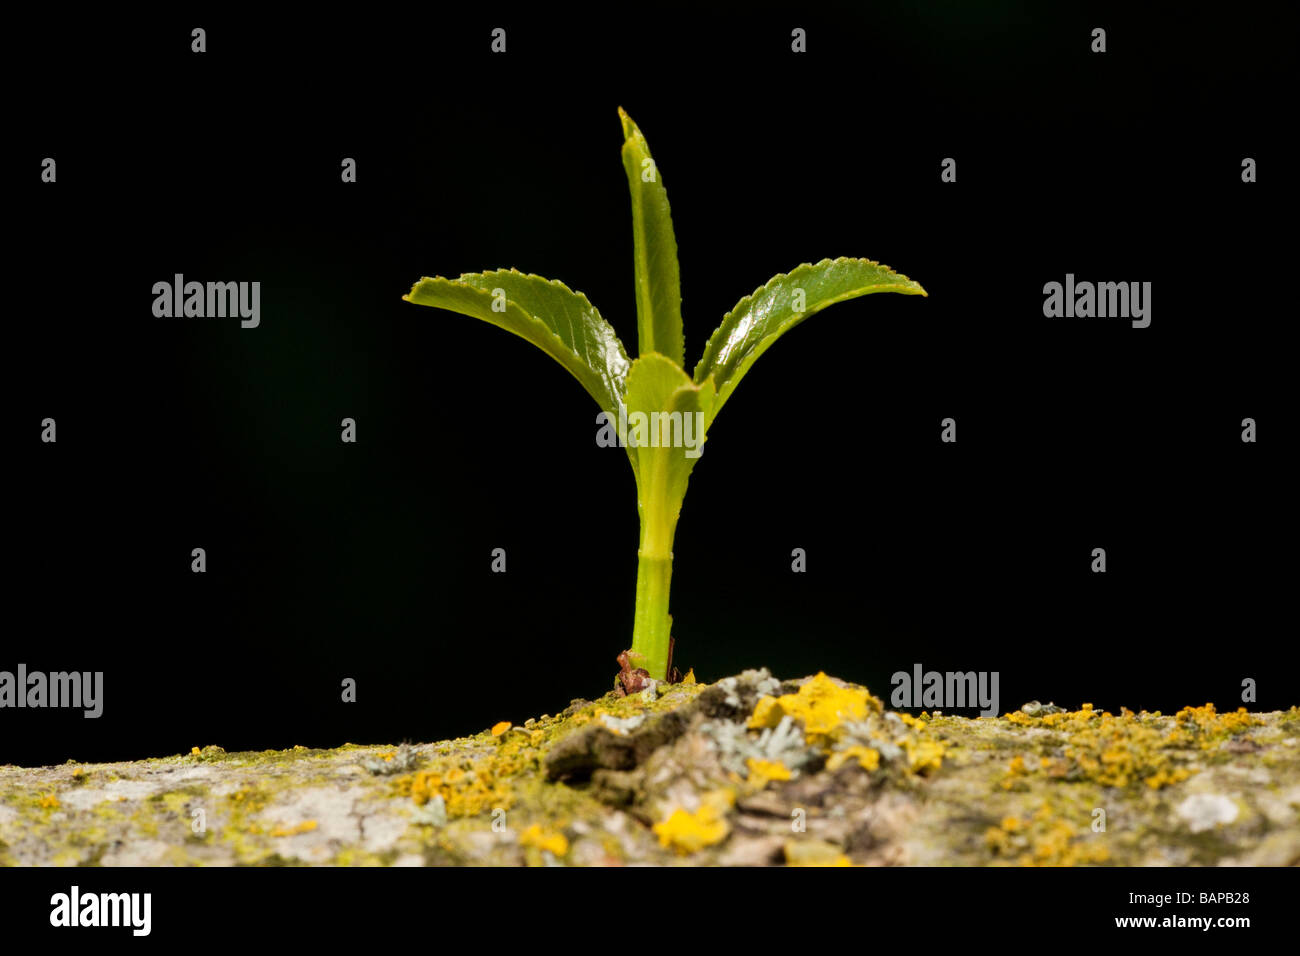 green shoots growing from a willow tree branch Stock Photo